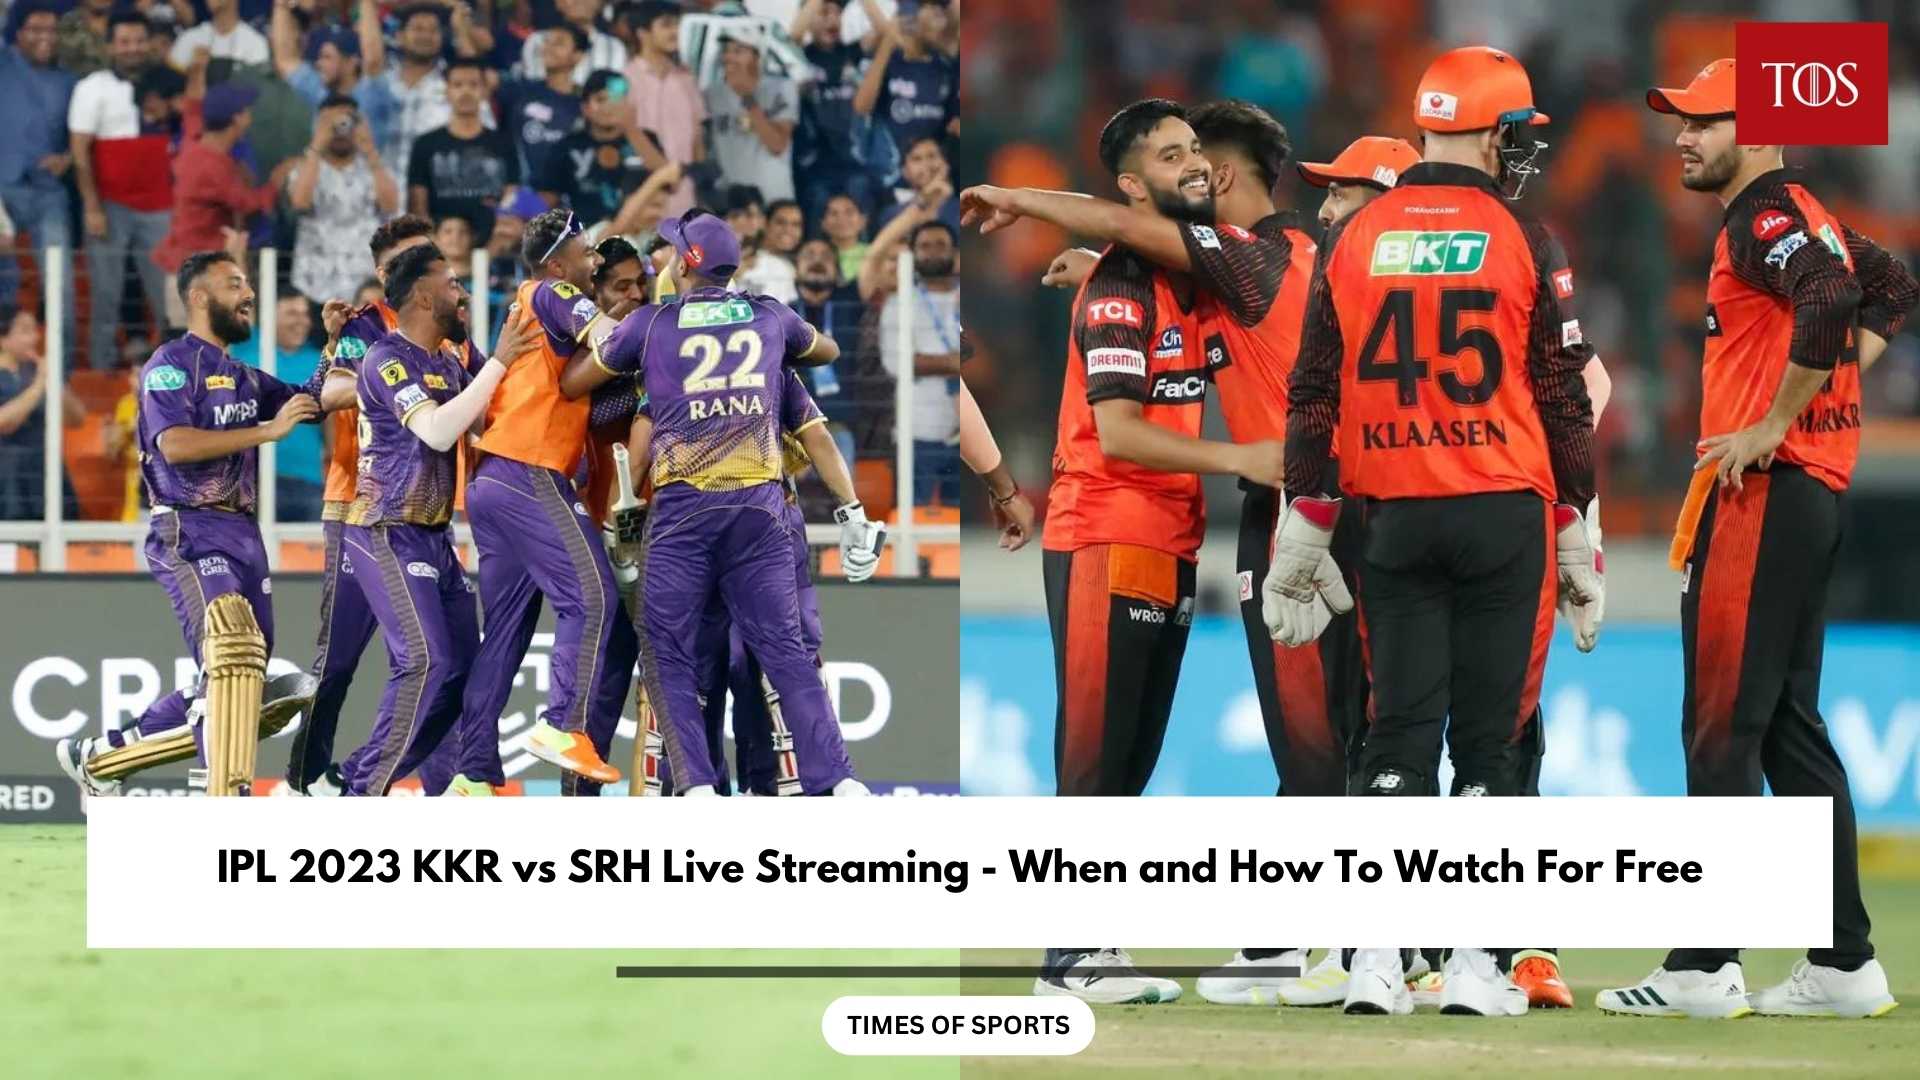 IPL 2023 KKR vs SRH Live Streaming When and How To Watch For Free